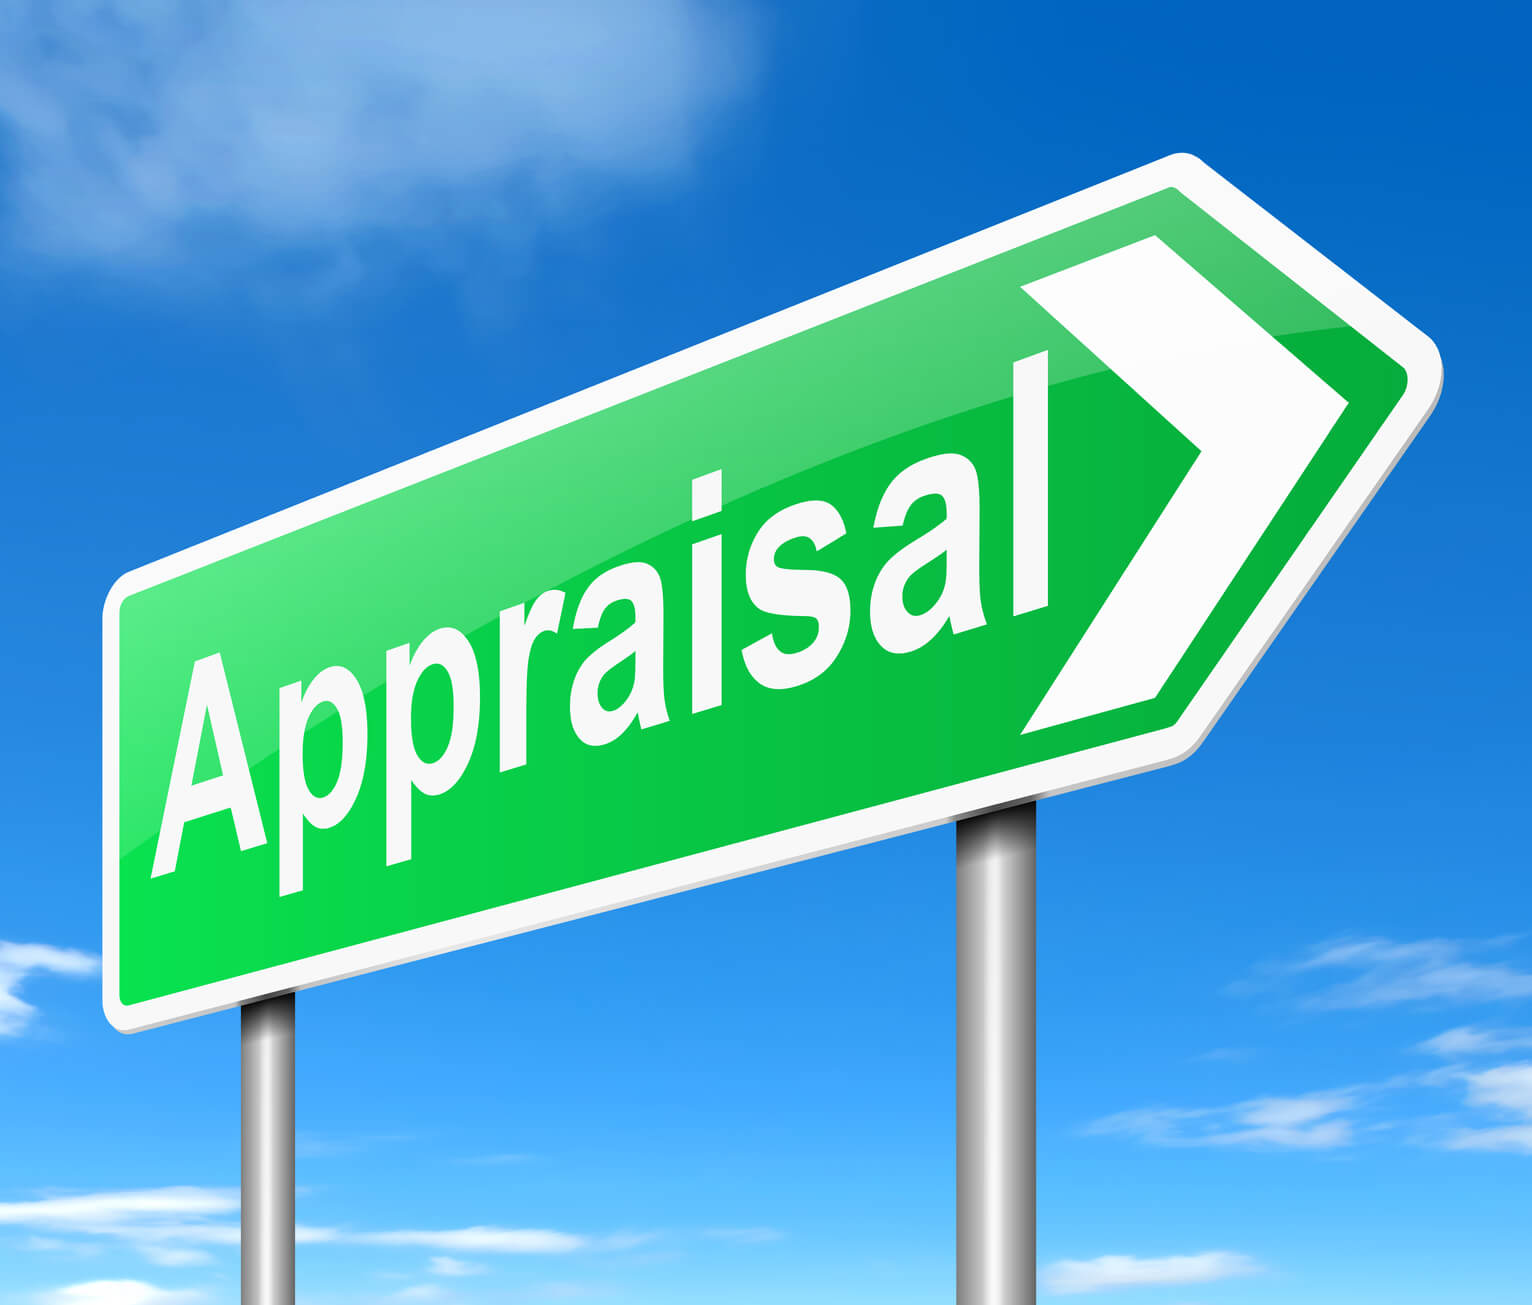 Appraisal Request - let us help you with any properties or sites